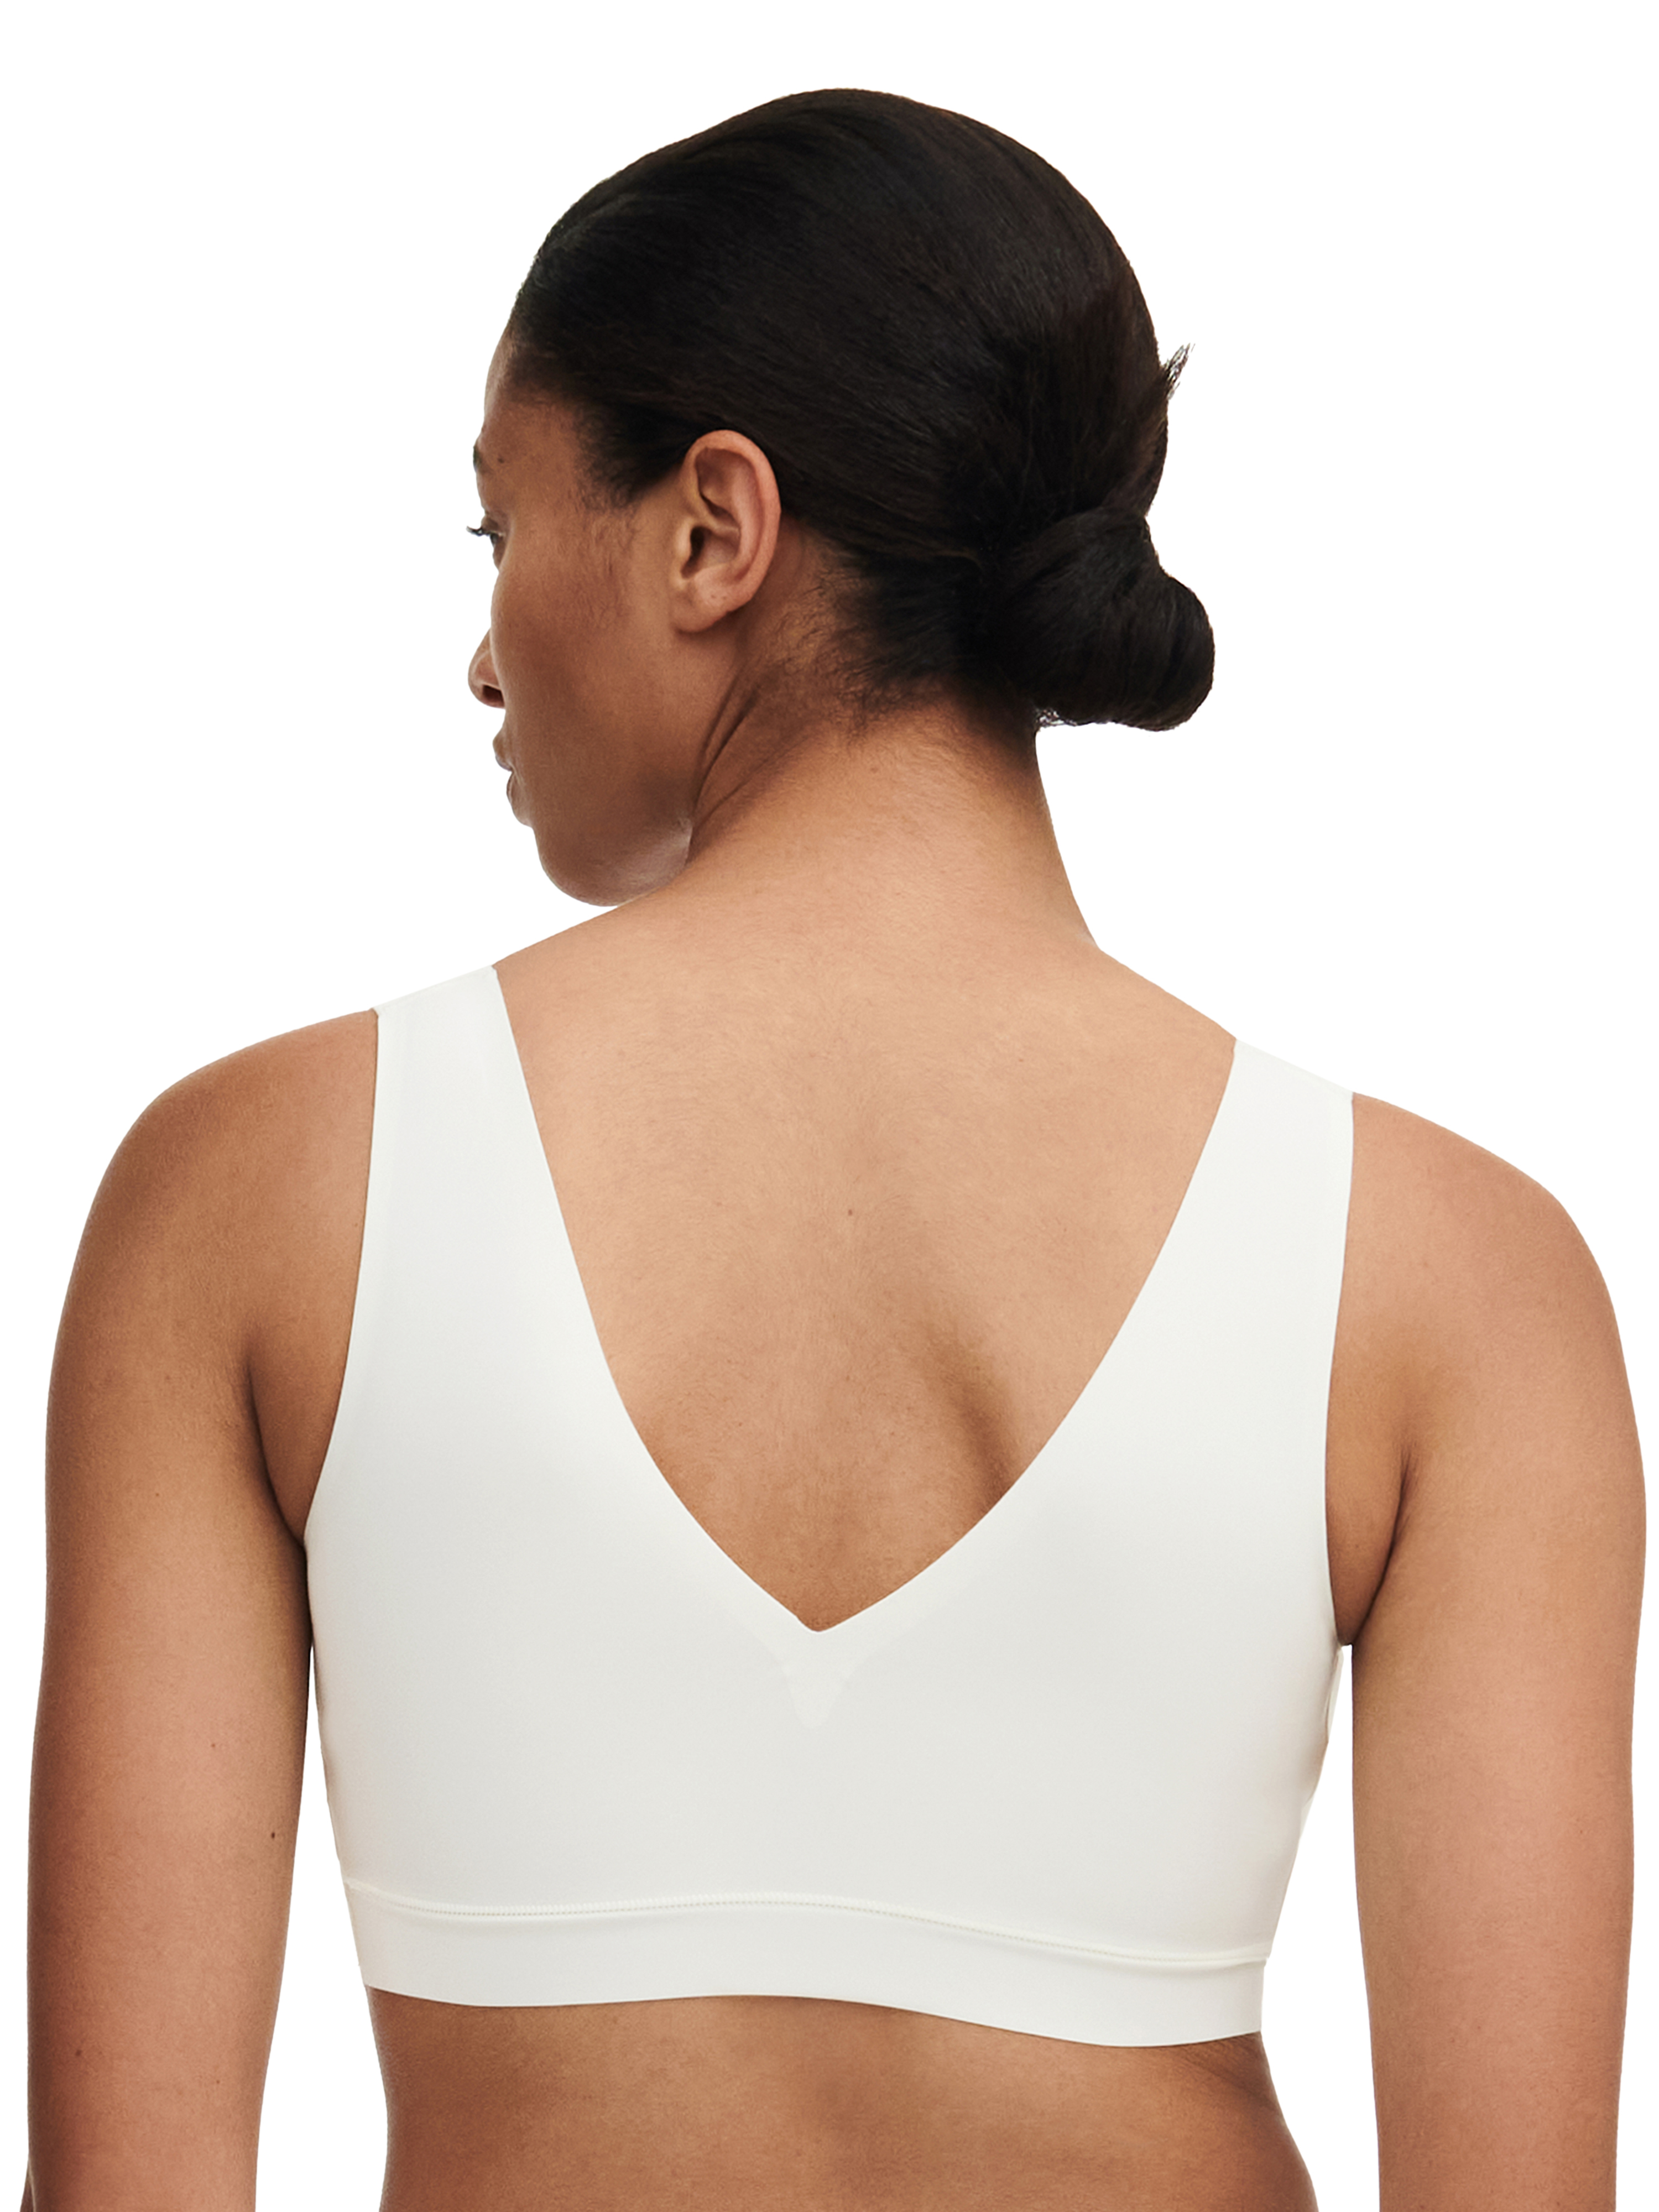 SOFTSTRETCH Bustier mit Soft Cups